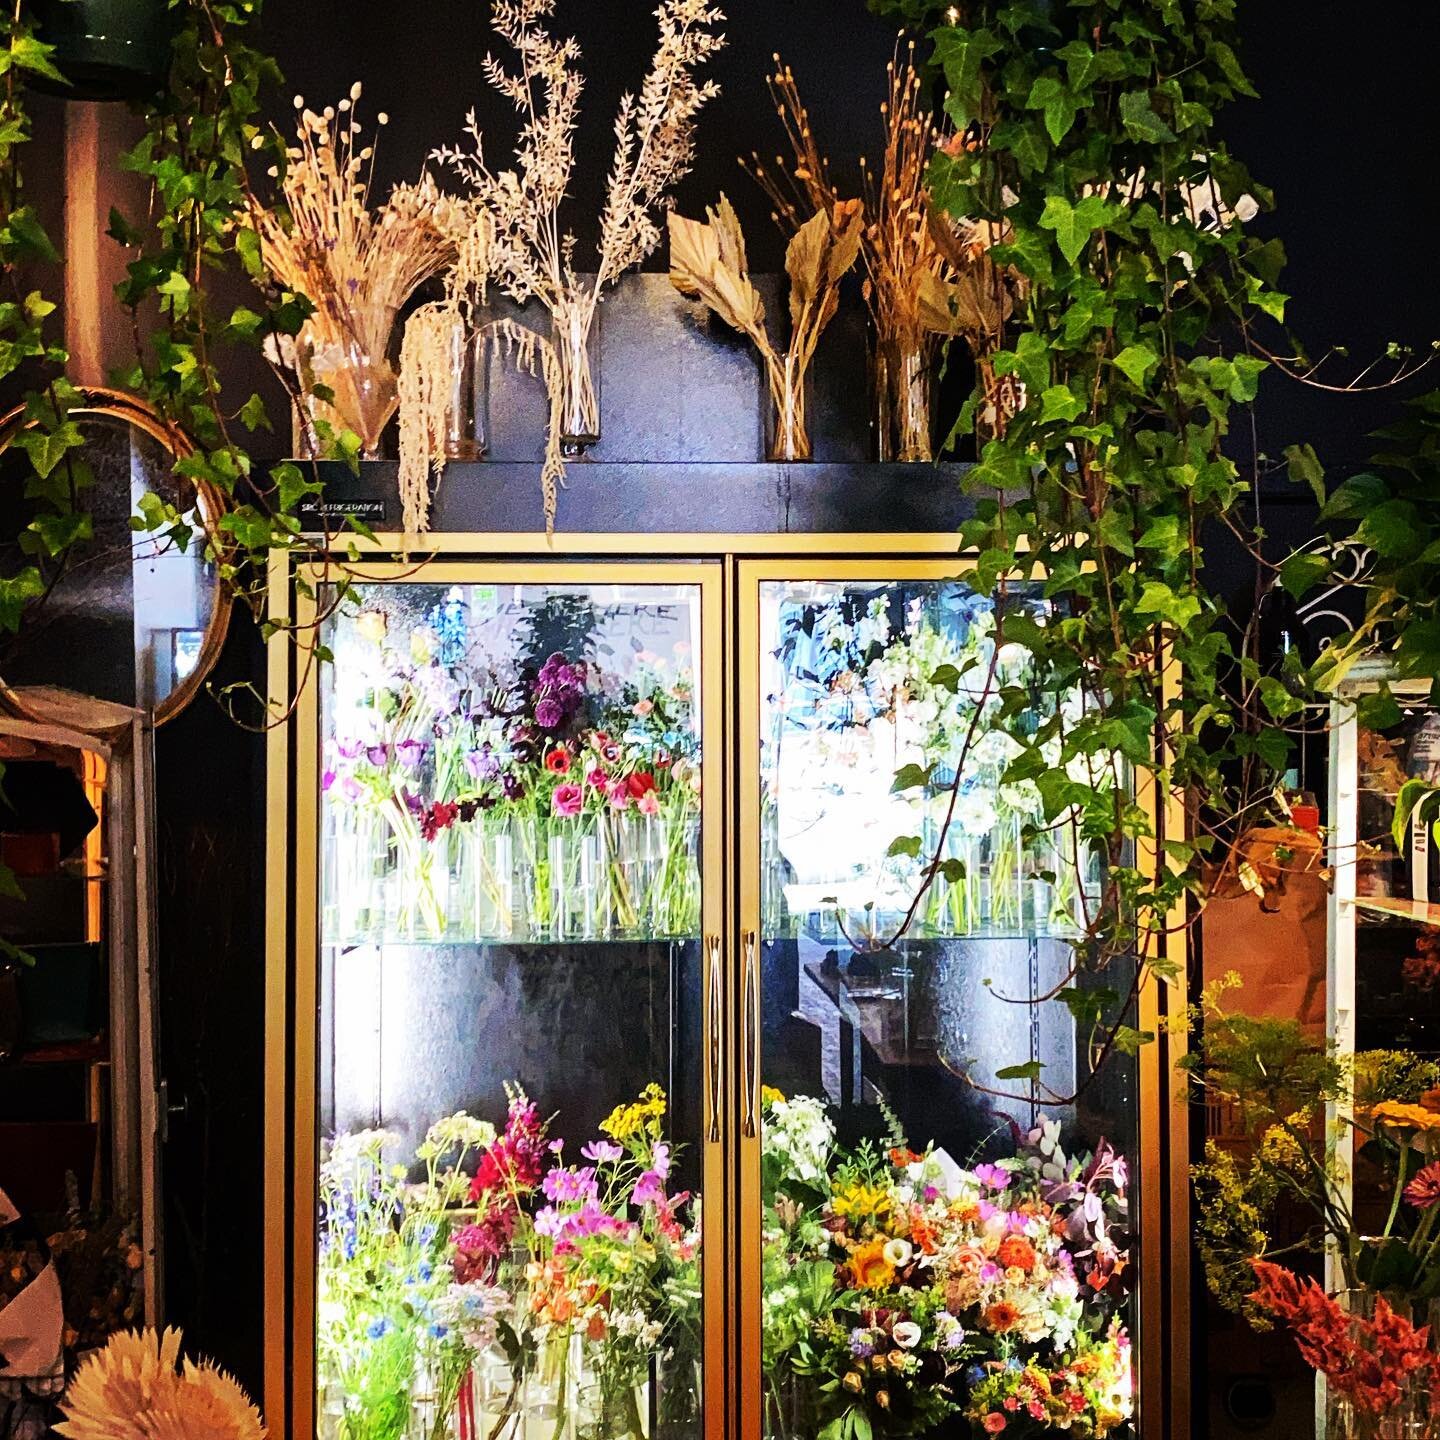 Friday visit to Chicago&rsquo;s own enchanted garden @asraigarden to scout some beautiful blooms 💐 💐During quarantine I so missed visiting this charming shop!#shoplocalchicago #floraldecor #chicagoshops #designingwithflowers #asraigarden